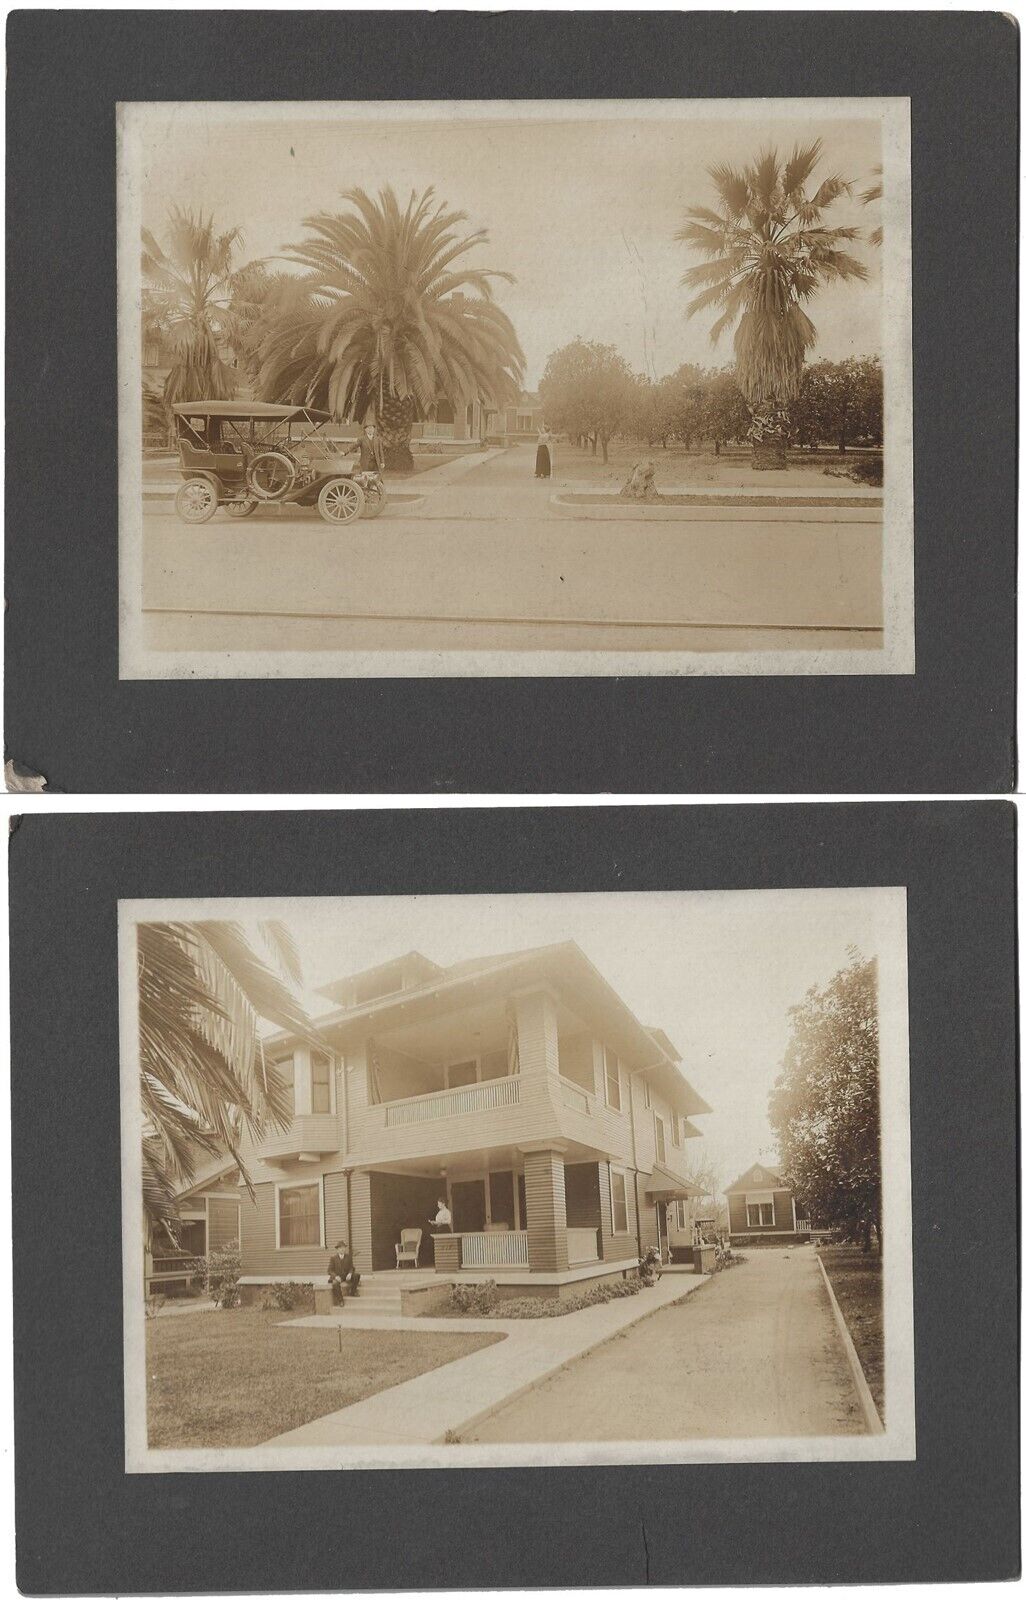 House Architecture California Fan Palm Tree Old Car 2 Vintage Photo Exterior